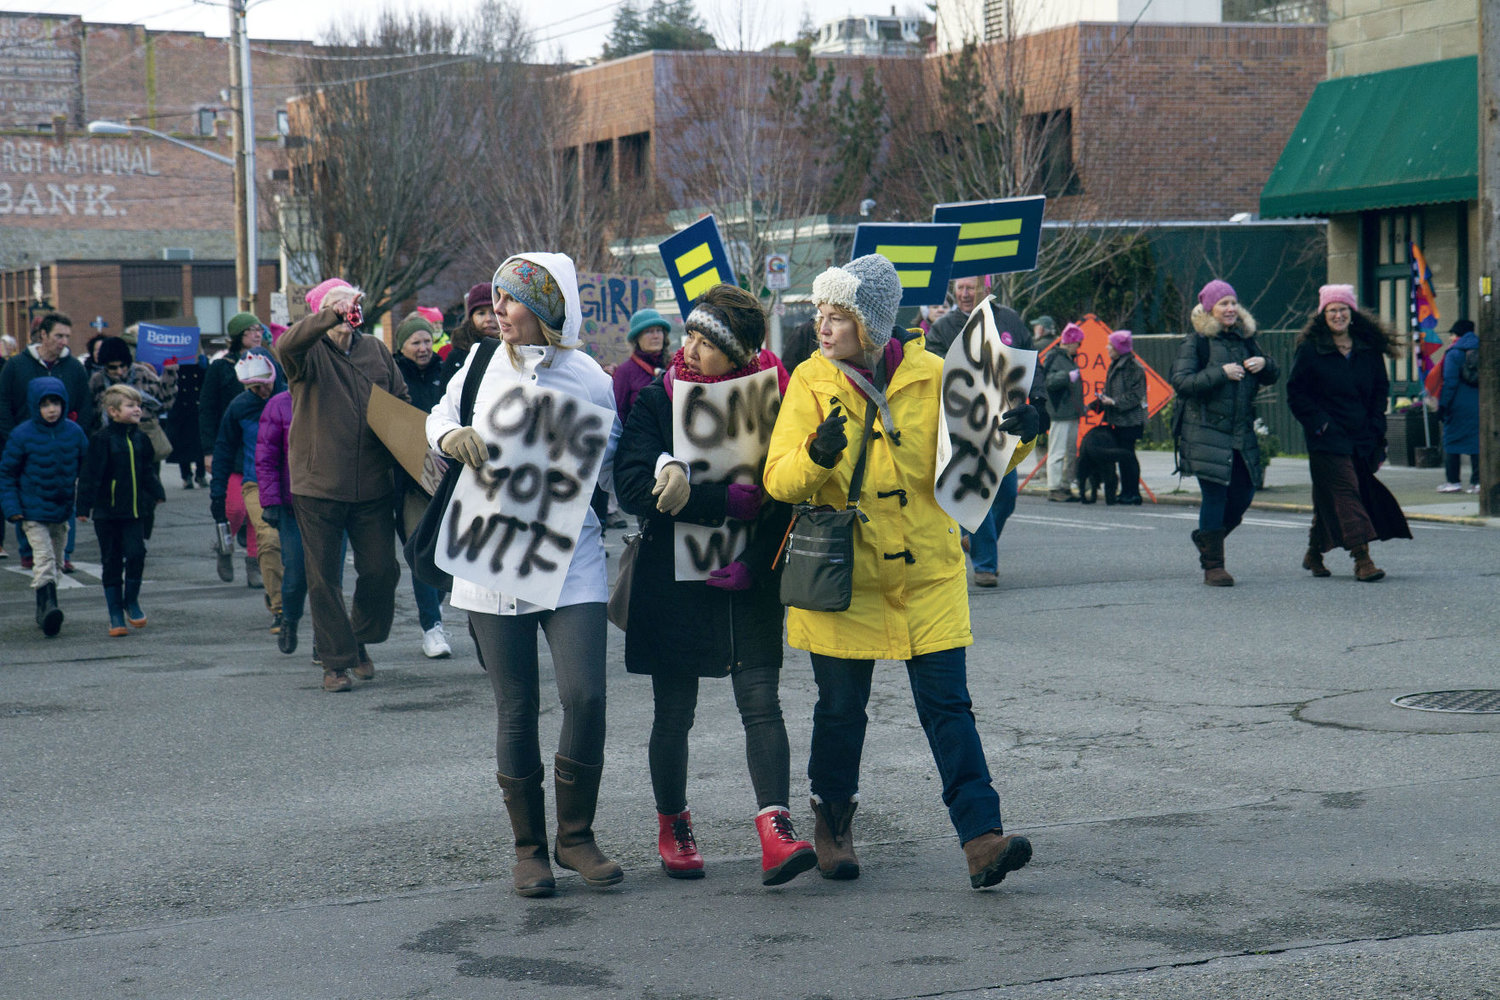 Jenny Pope, Chris Tsang and April Anastasi came from Freeland to march Jan. 20.